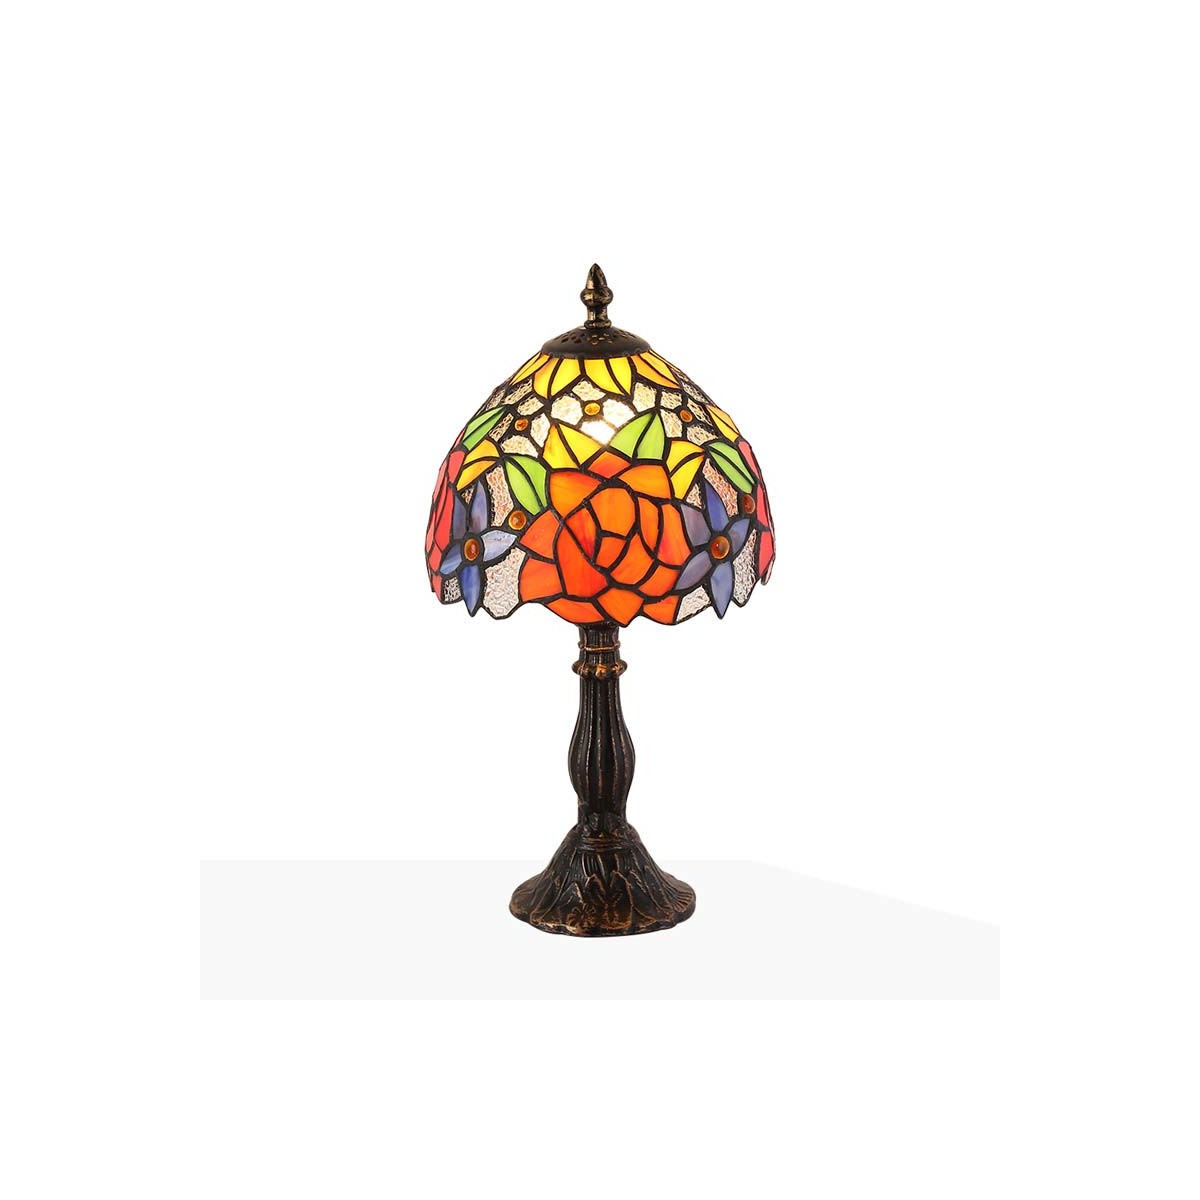 Tiffany-inspired lamp with rose mosaic in glass